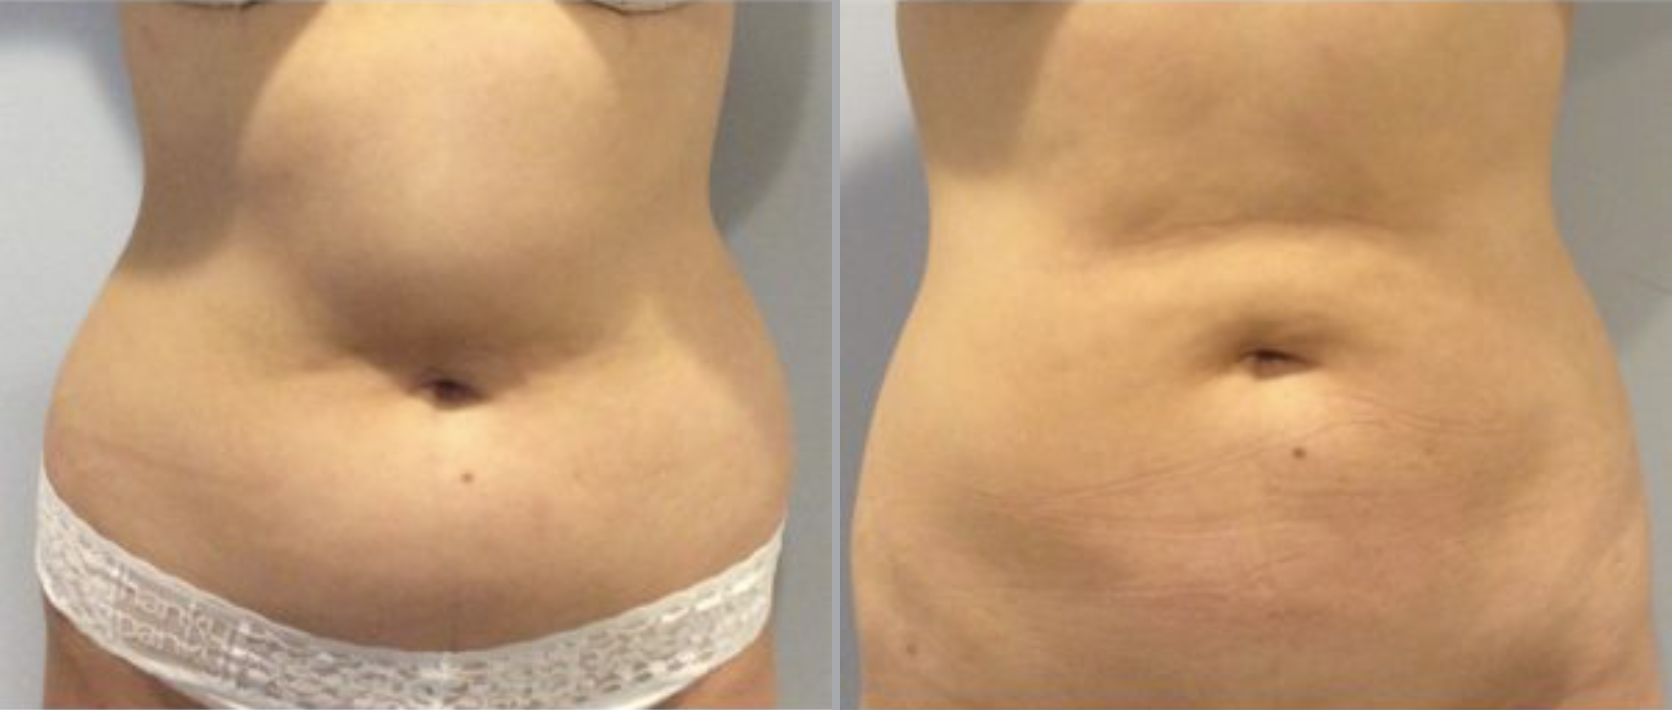 Liposuction Before and After Pictures in Bucks County, PA and Hunterdon County, NJ